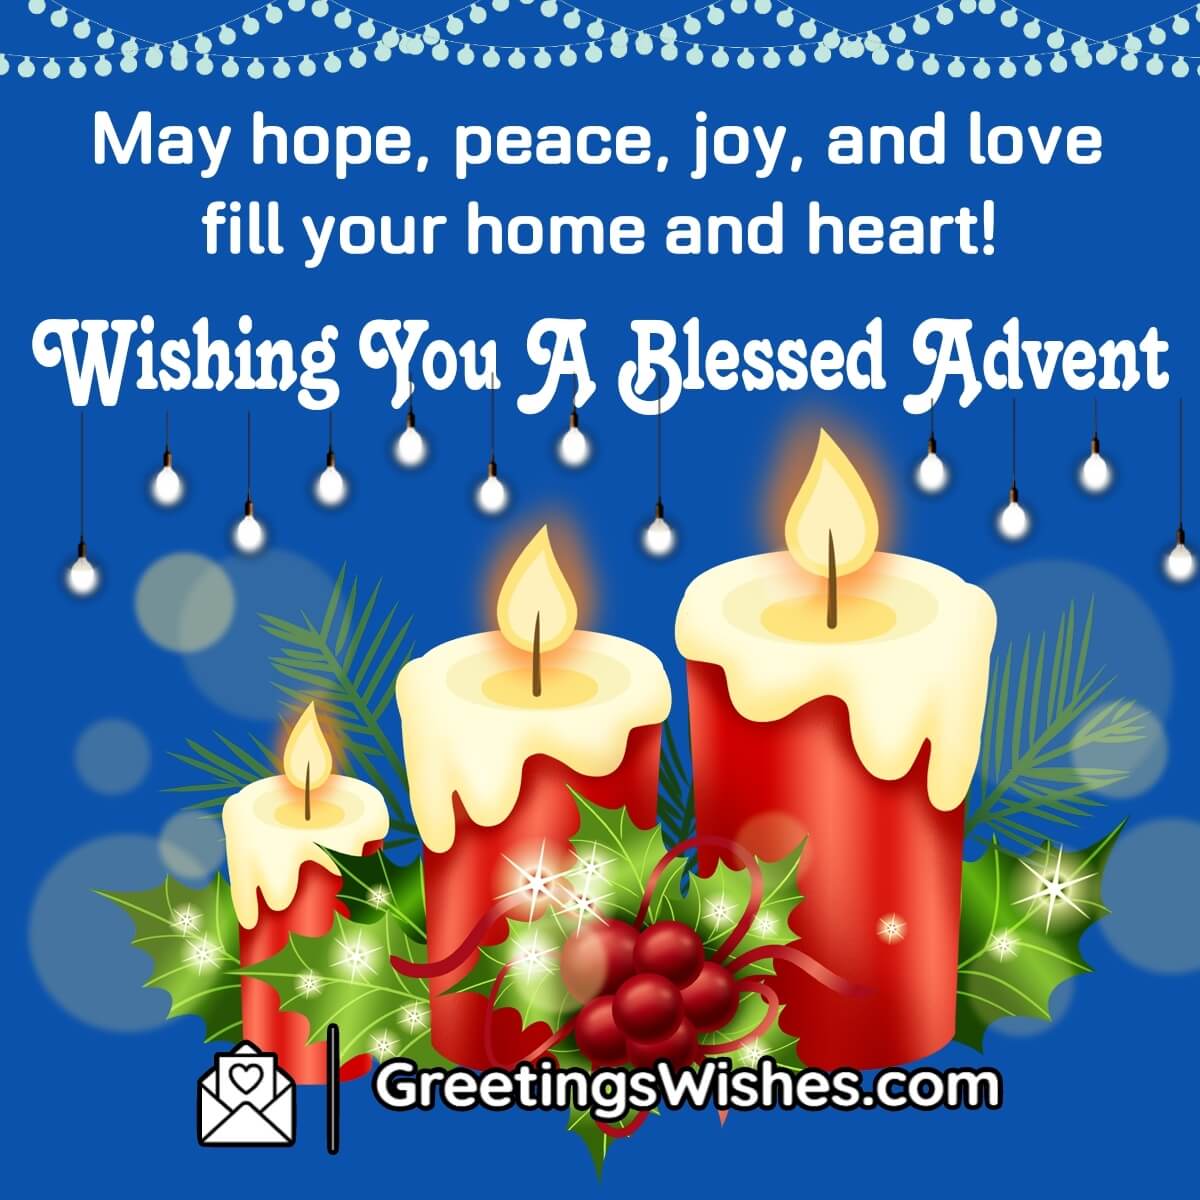 Wishing You A Blessed Advent